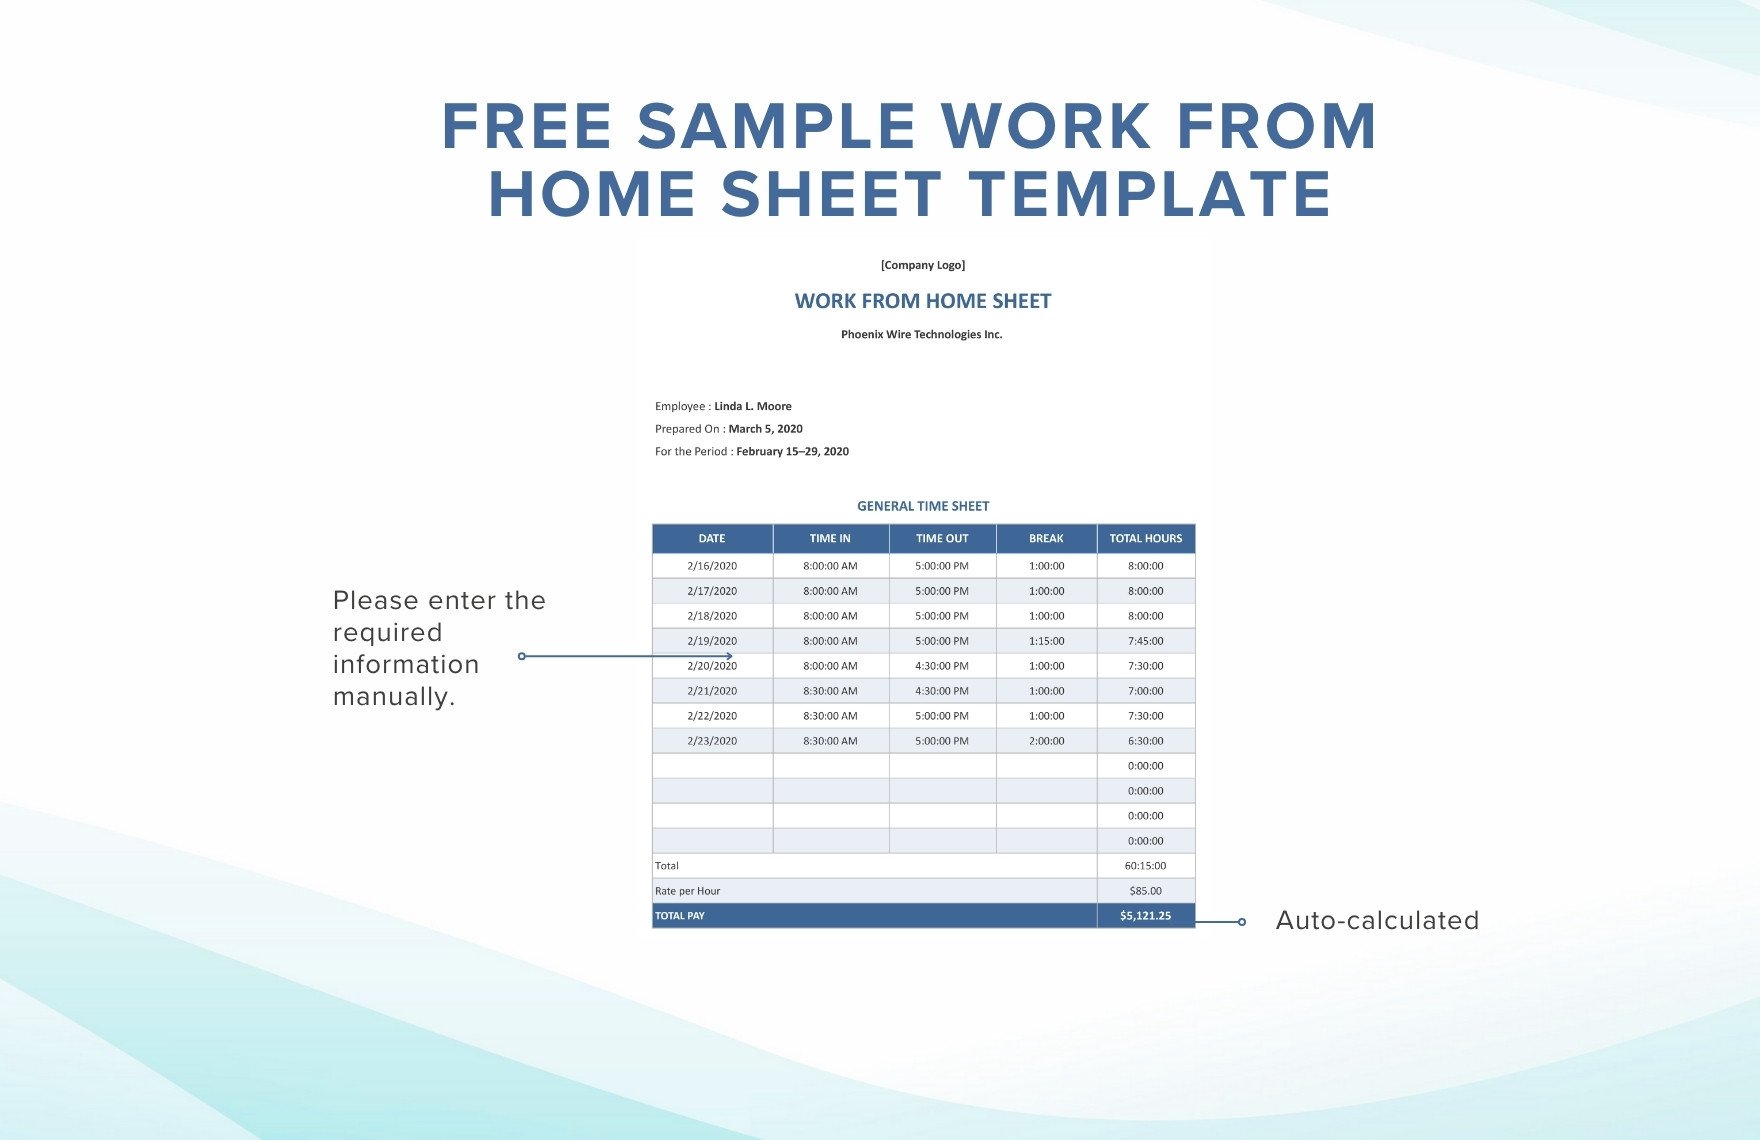 Sample Work From Home Sheet Template